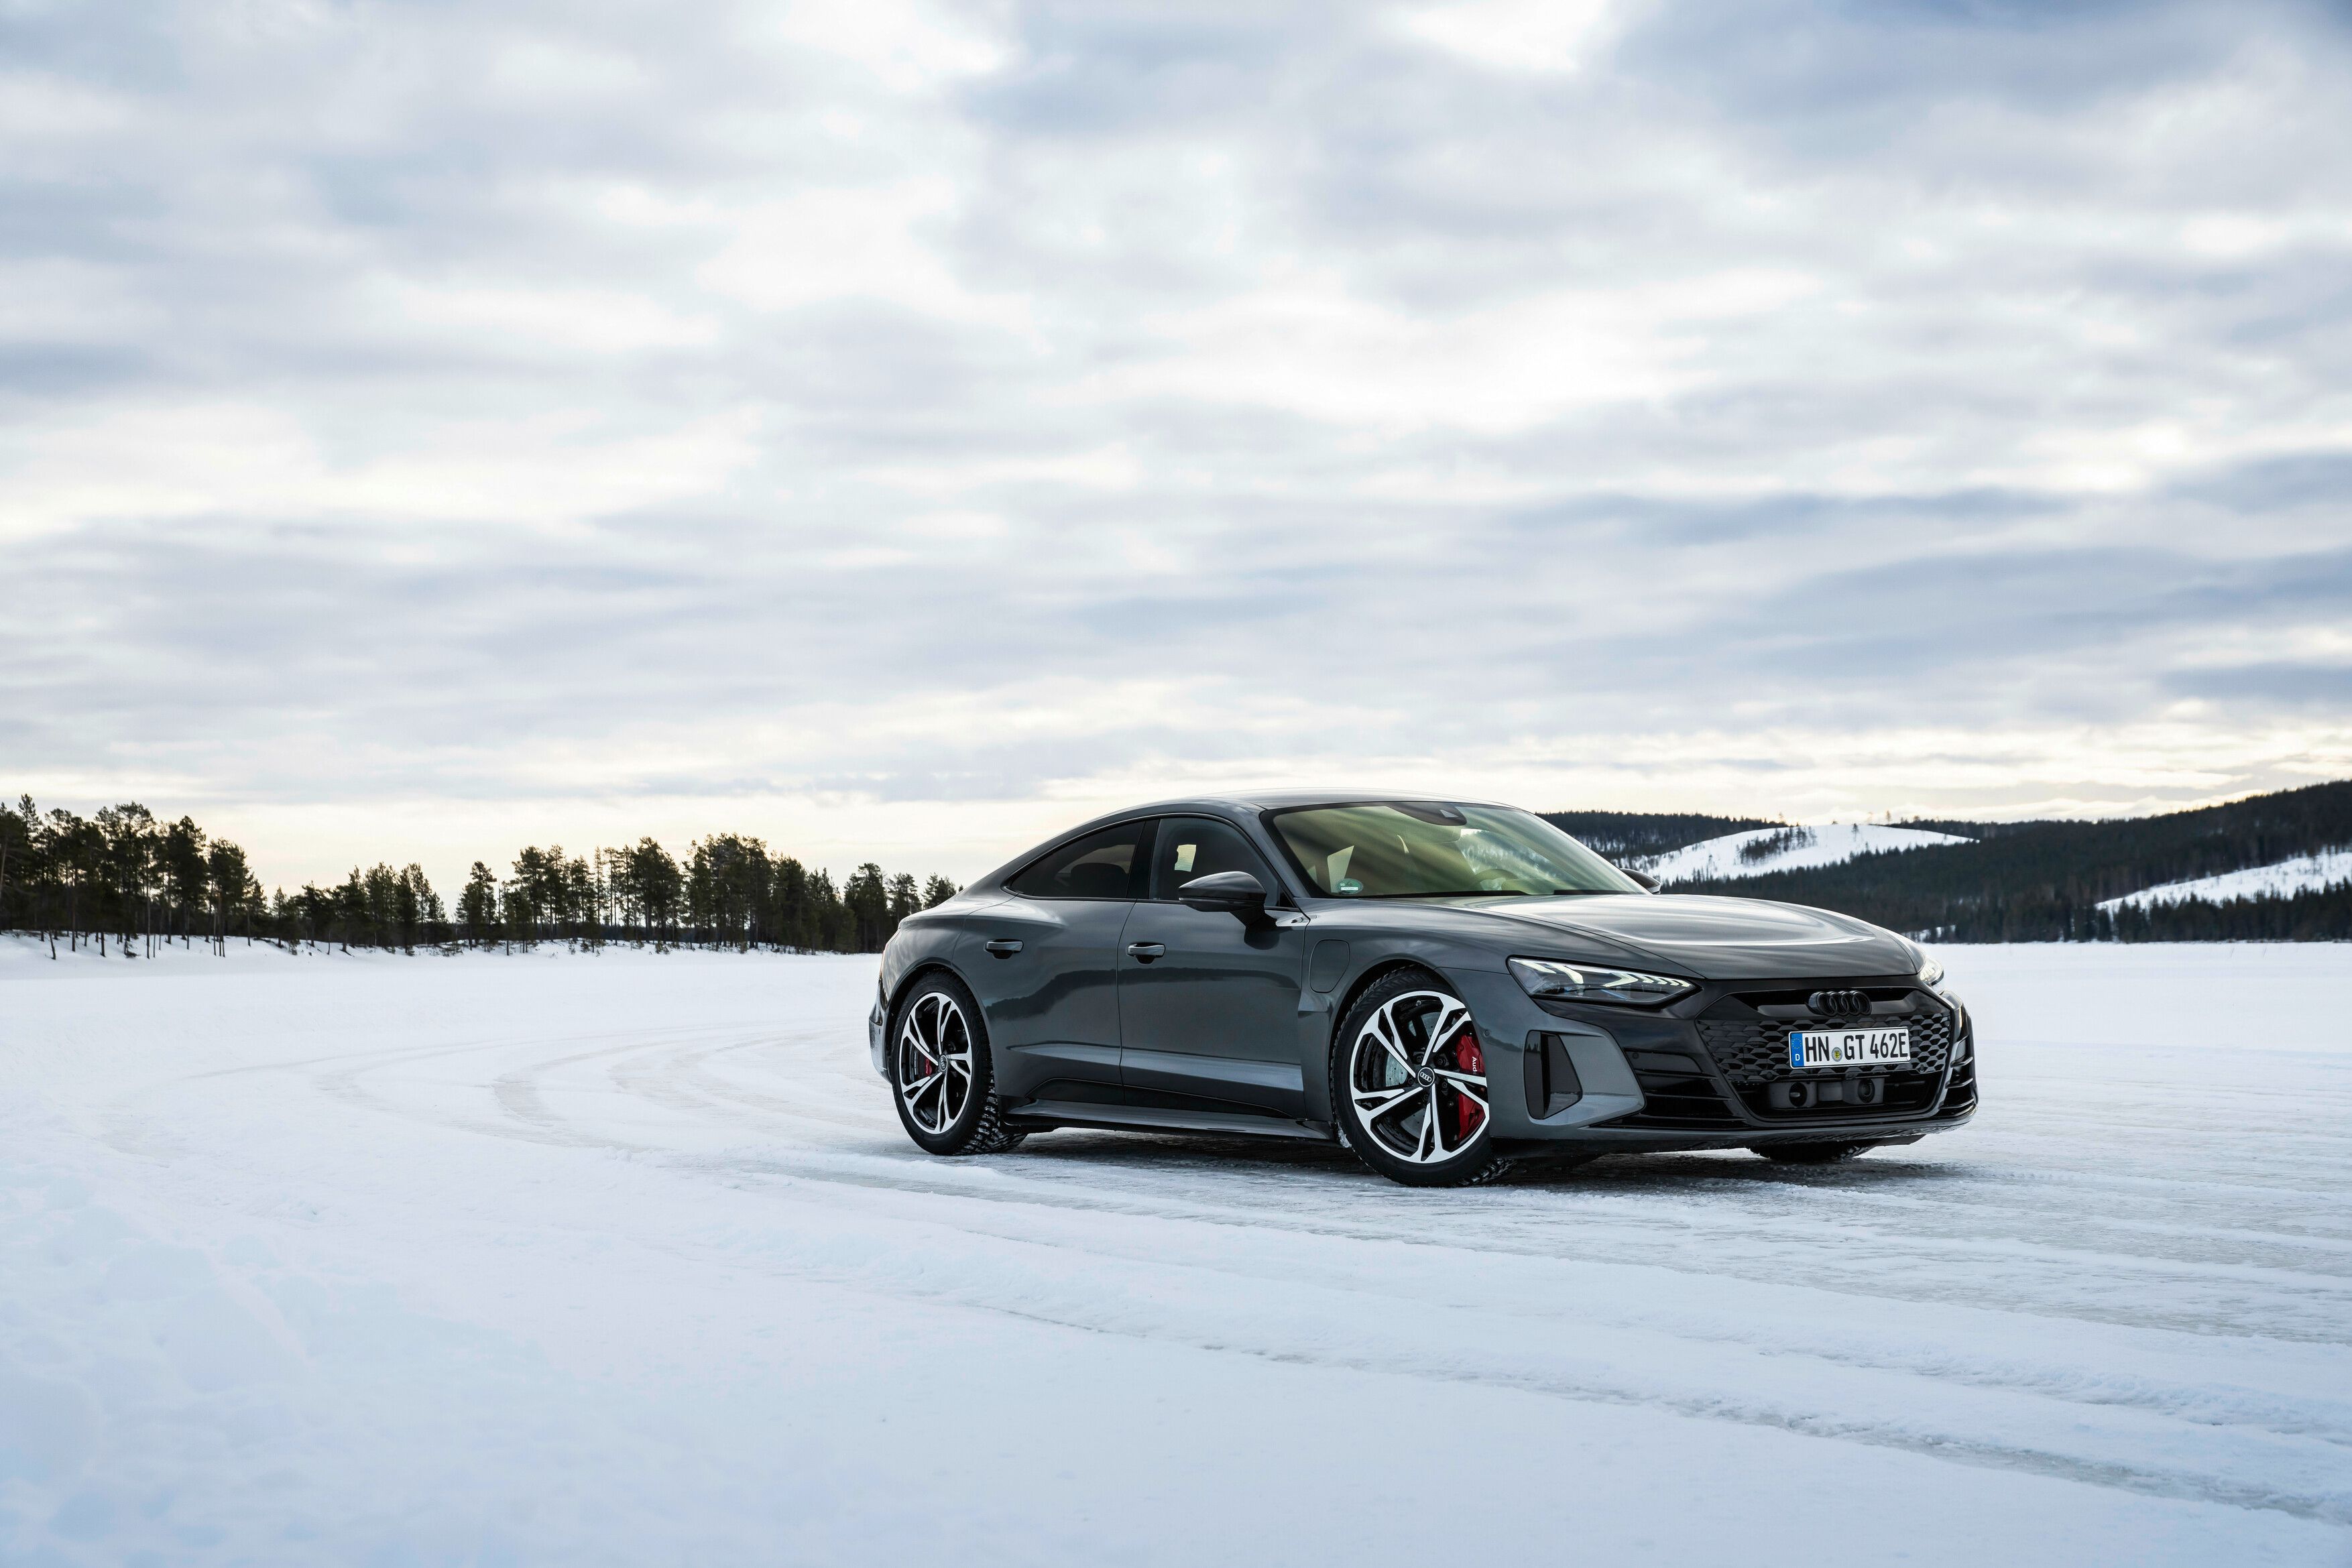 The Audi E-Tron GT drives on the snow.